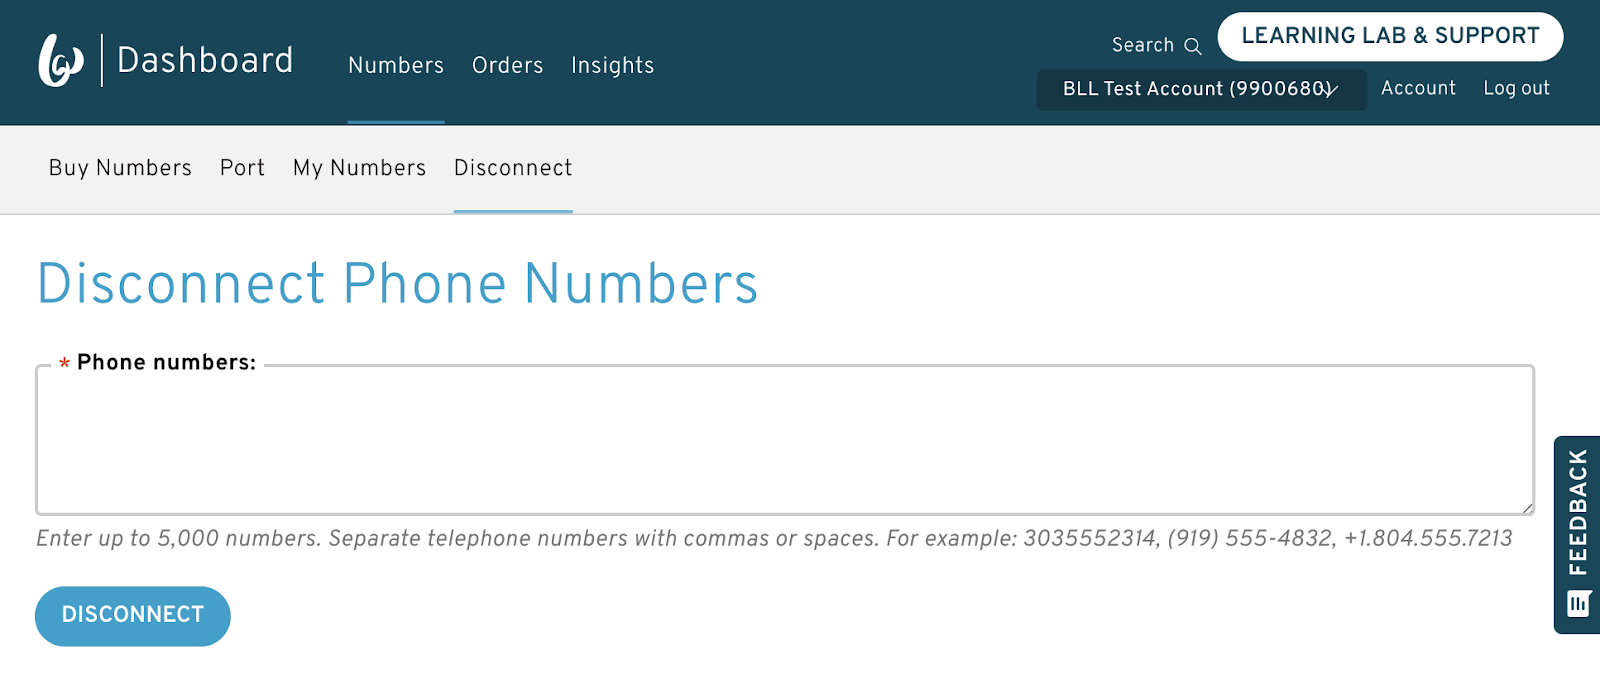 Disconnect Phone Numbers page